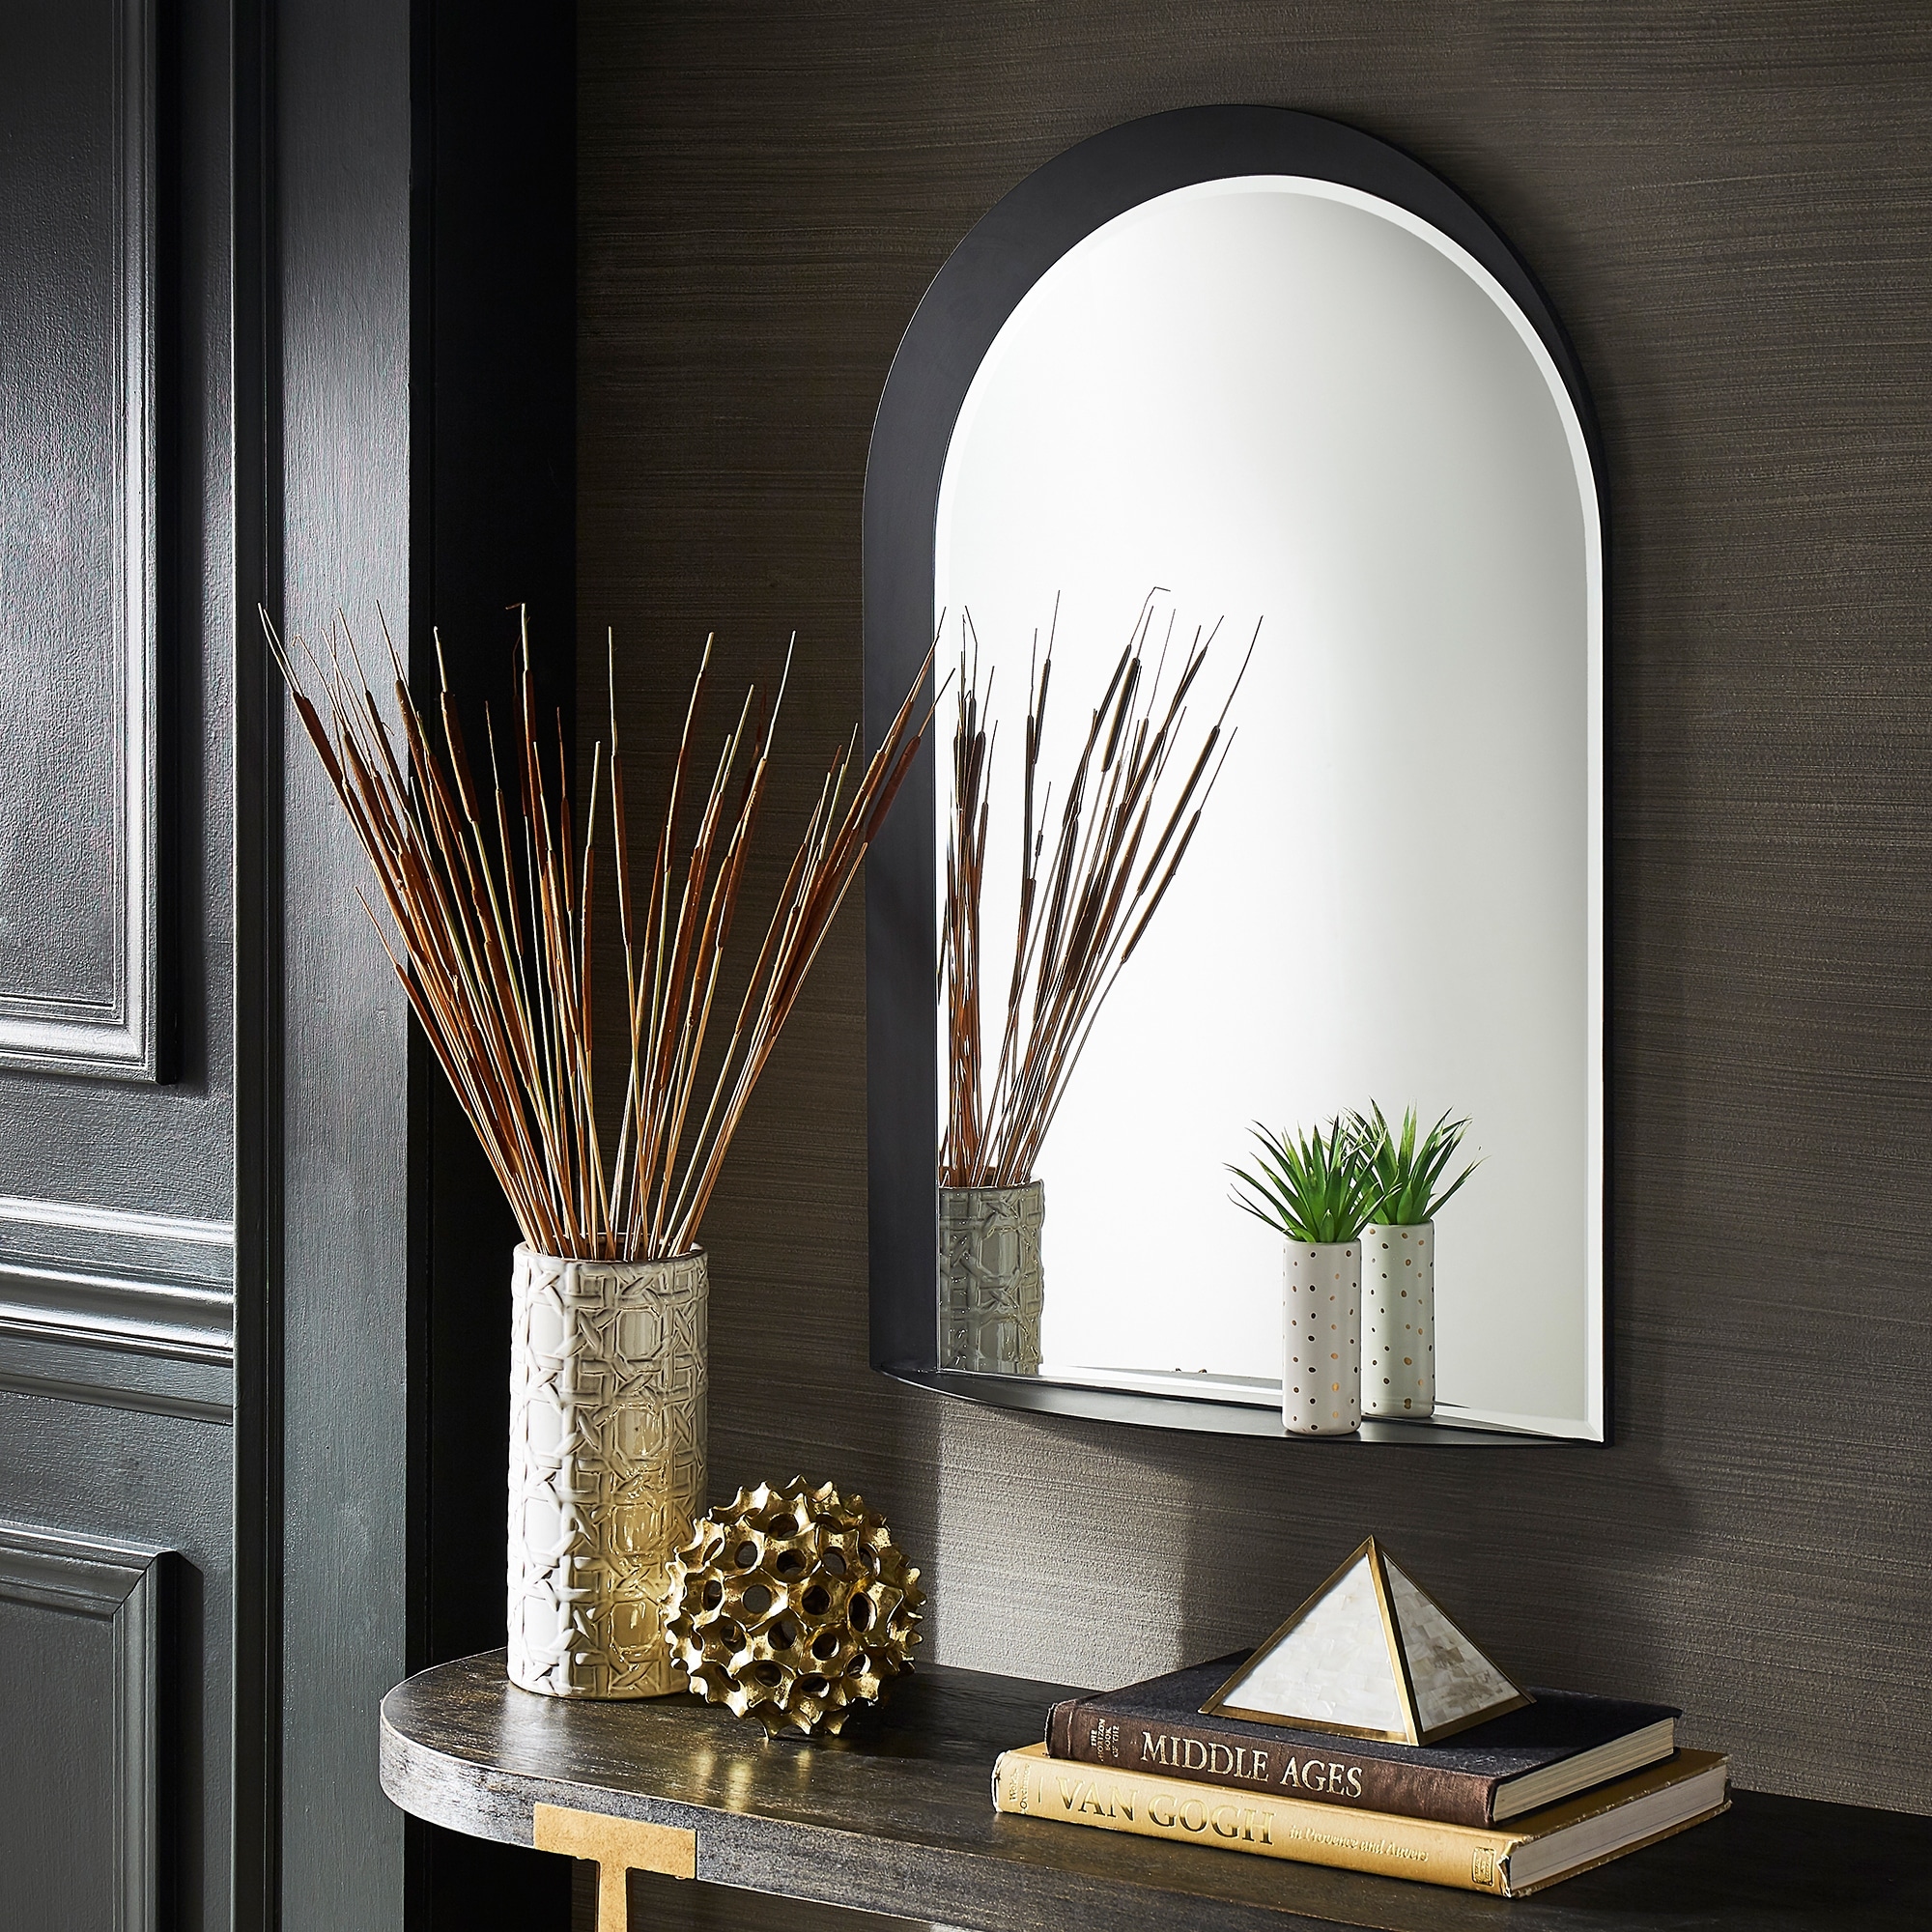 not found - 404  Wall mirror with shelf, Entryway mirror with hooks,  Mirror wall living room